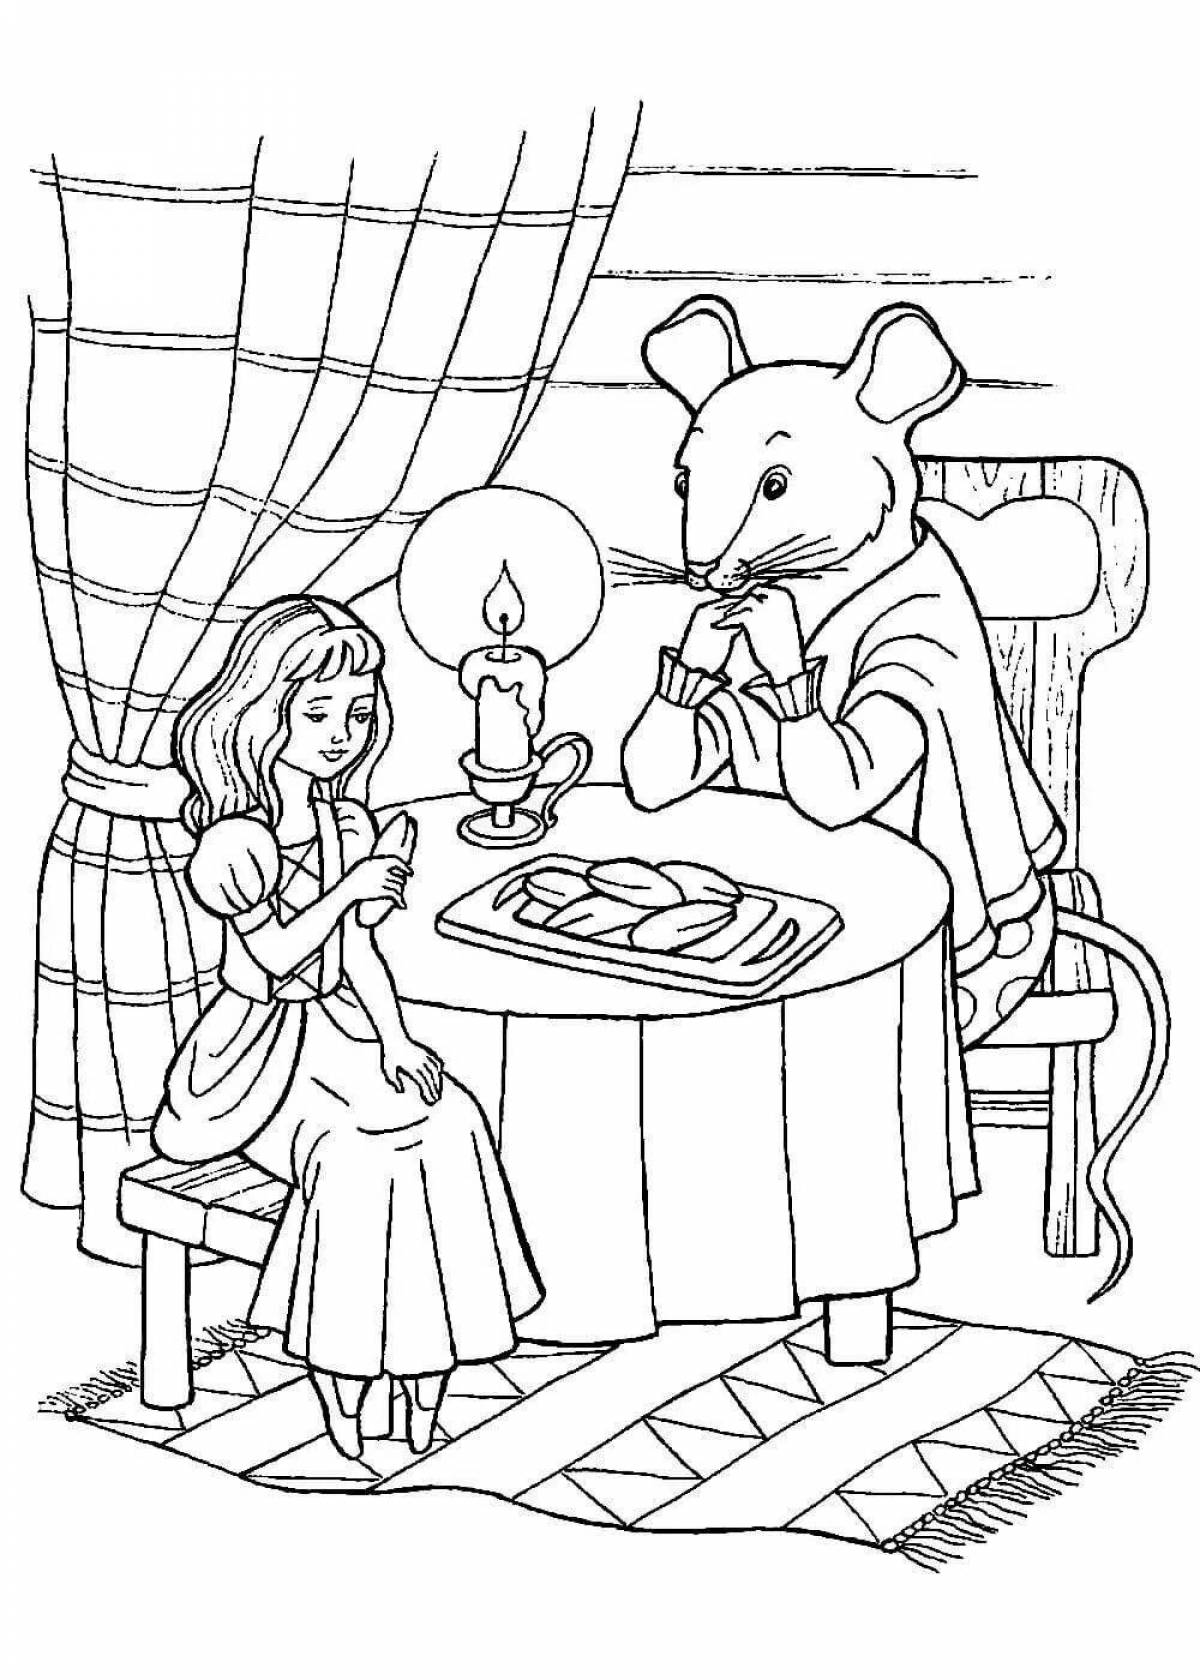 Playful coloring book based on fairy tales